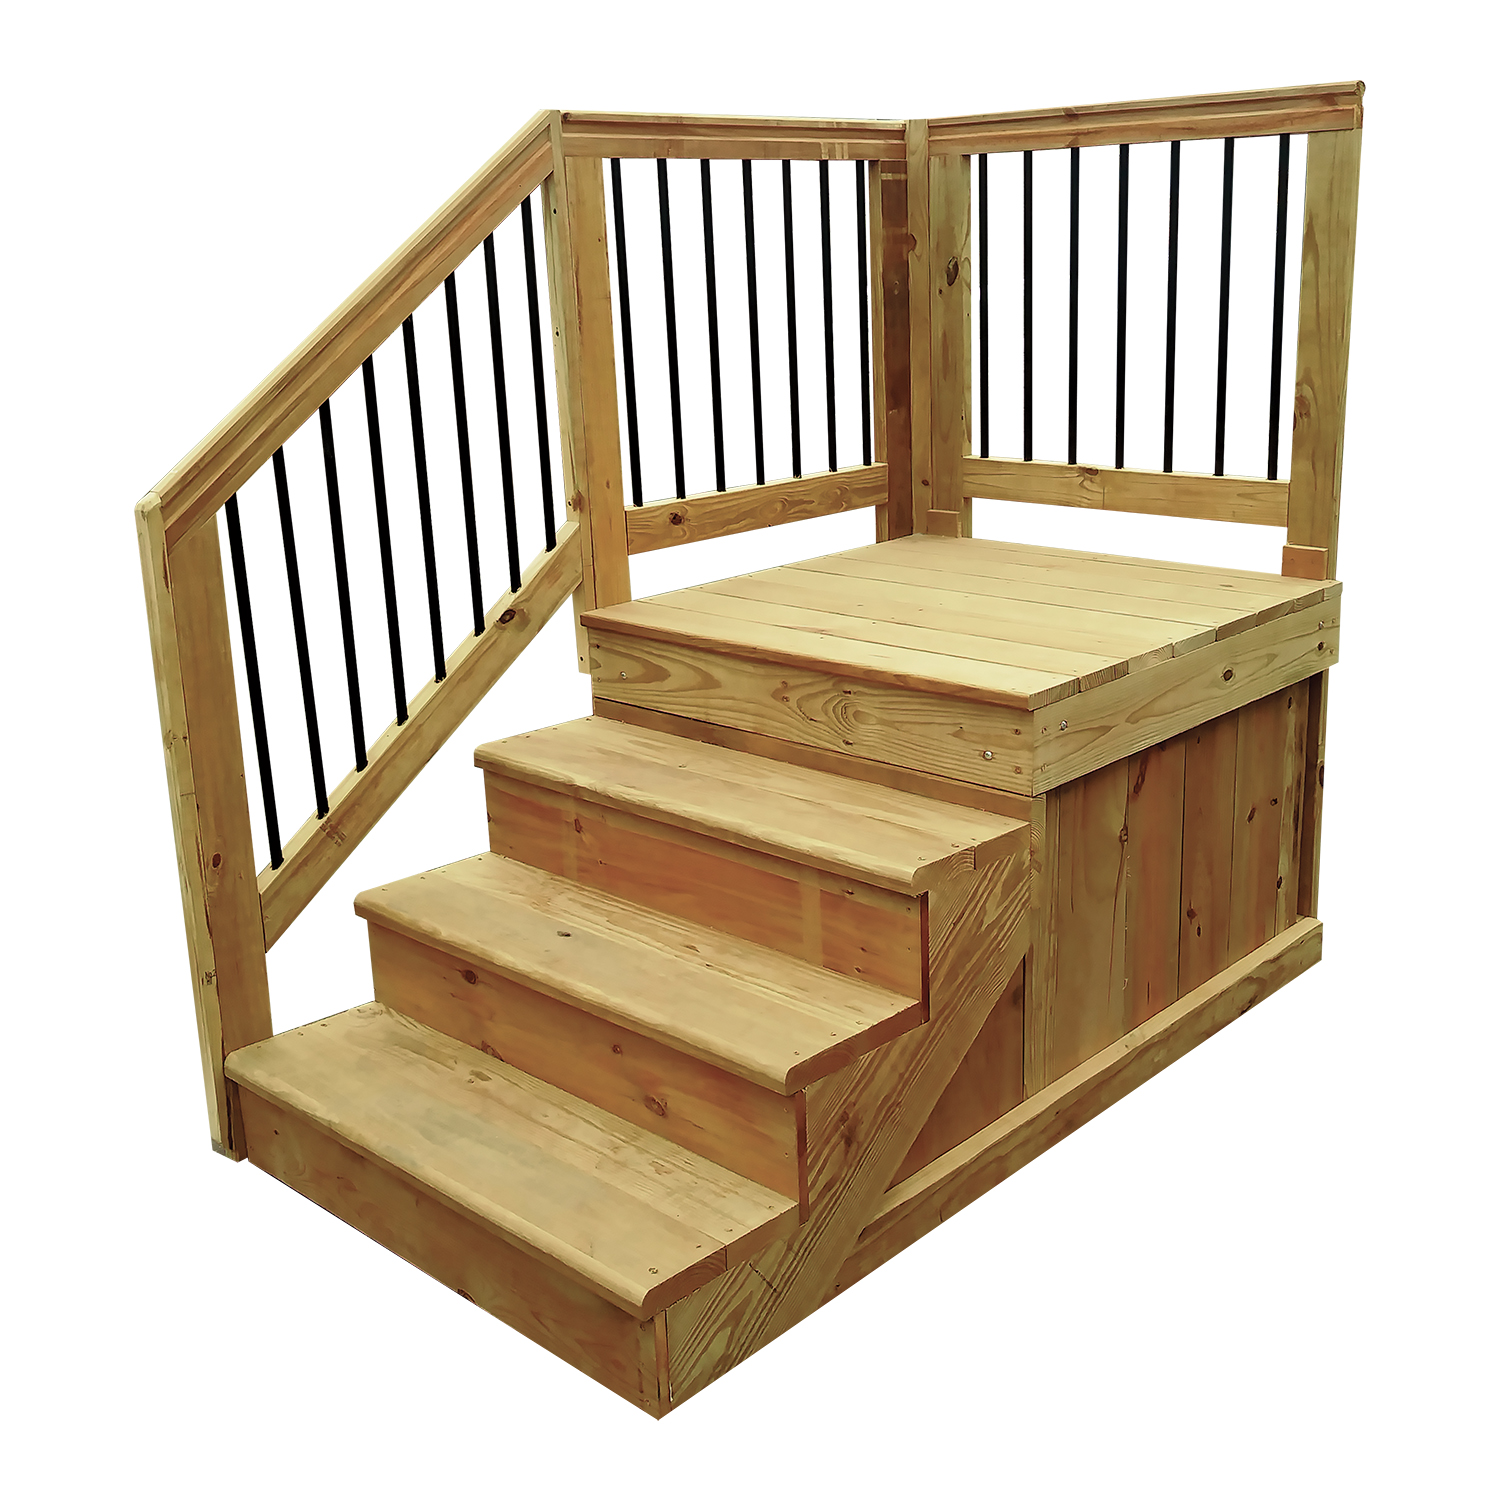 Enclosed Stained Wood Steps - Mobile home enclosed stained wood steps : You'll notice the difference.